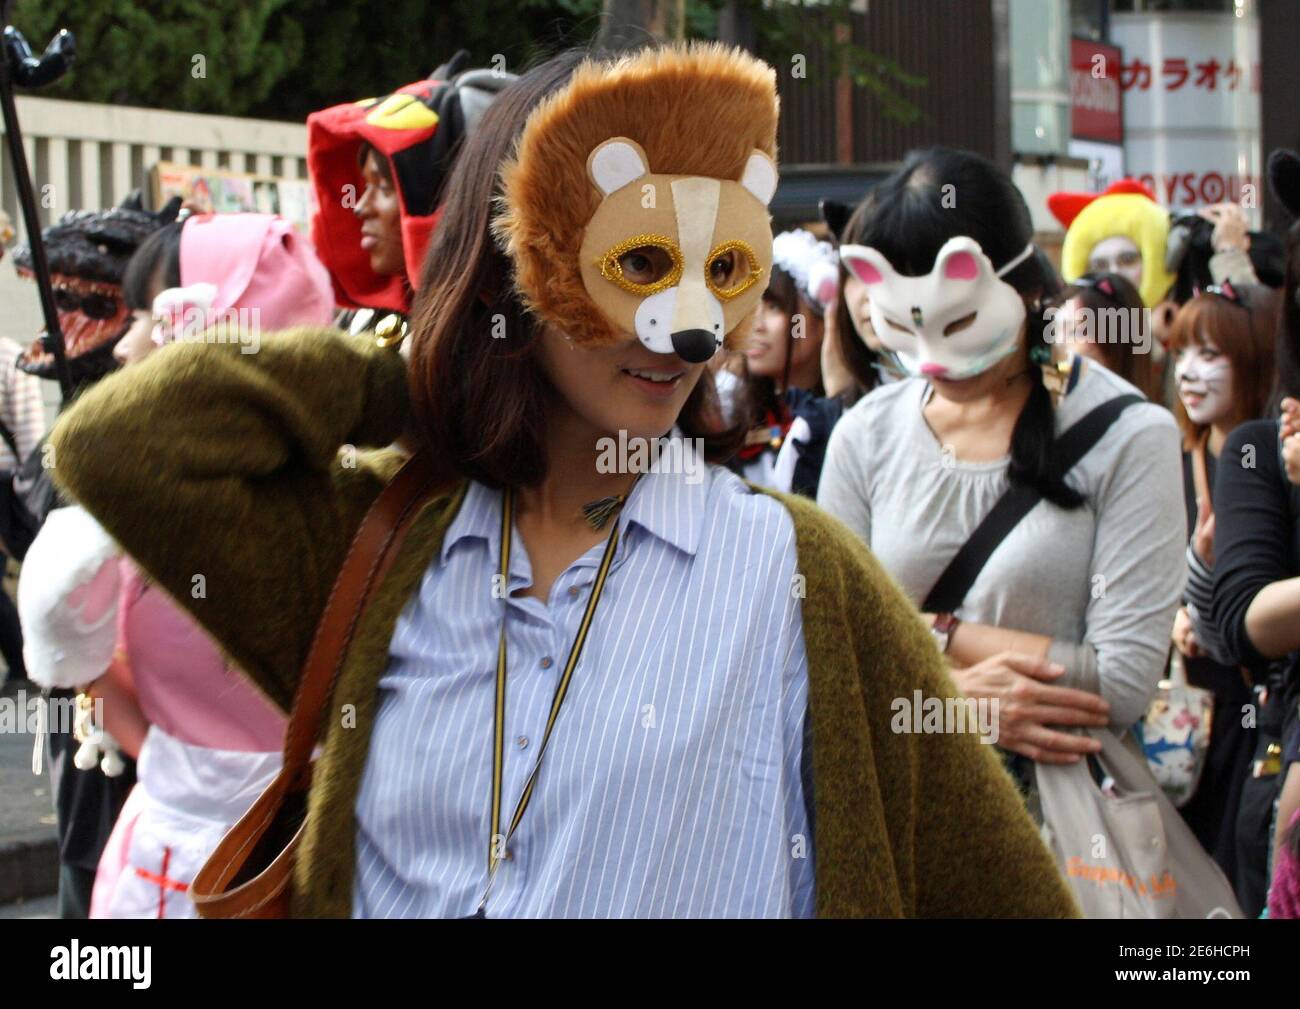 Participants wearing animal masks, attend an annual ghost cat "Bakeneko"  festival in Tokyo, Japan, October 16, 2016. Picture taken October 16, 2016.  REUTERS/Miyu Ando Stock Photo - Alamy